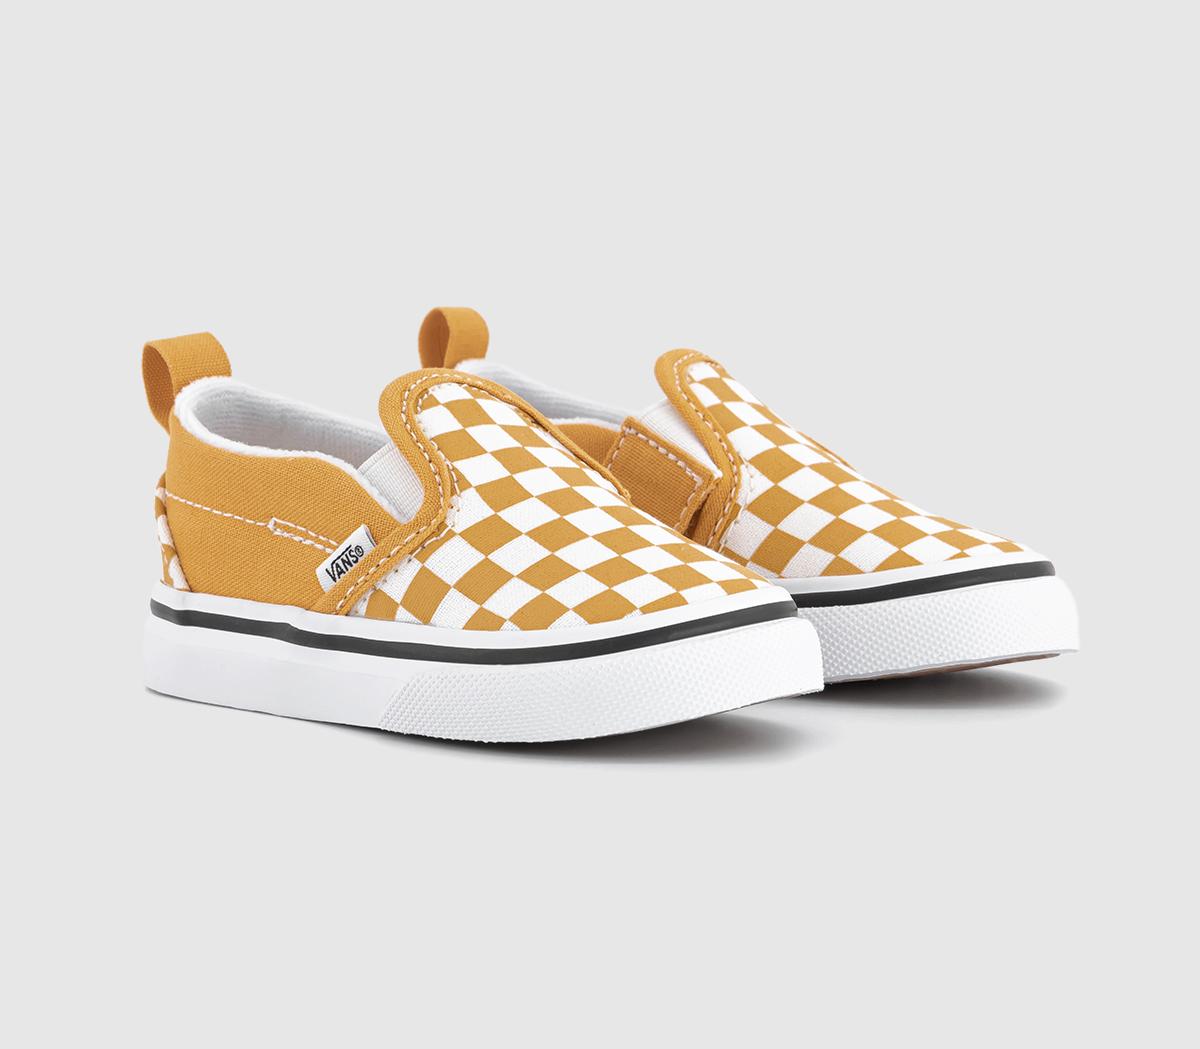 Vans Kids Classic Slip On Toddler Trainers Color Theory Checkerboard Golden Glow Gold/White, 9infant